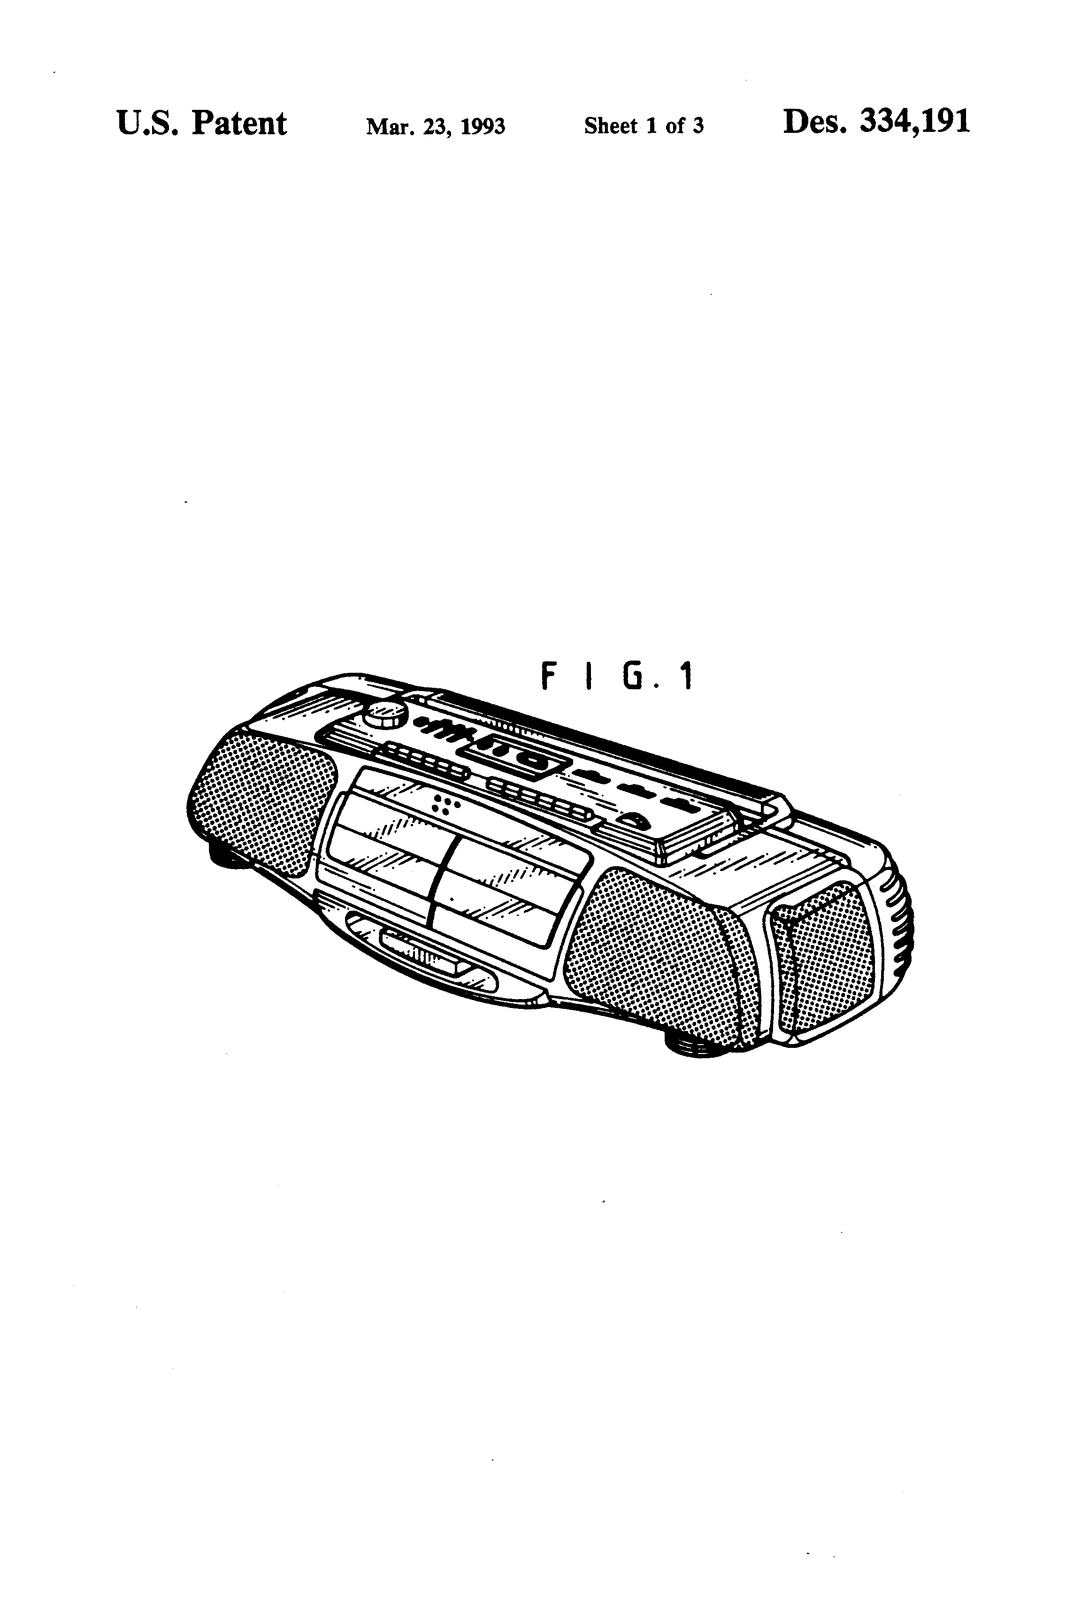 USD334191-1.png